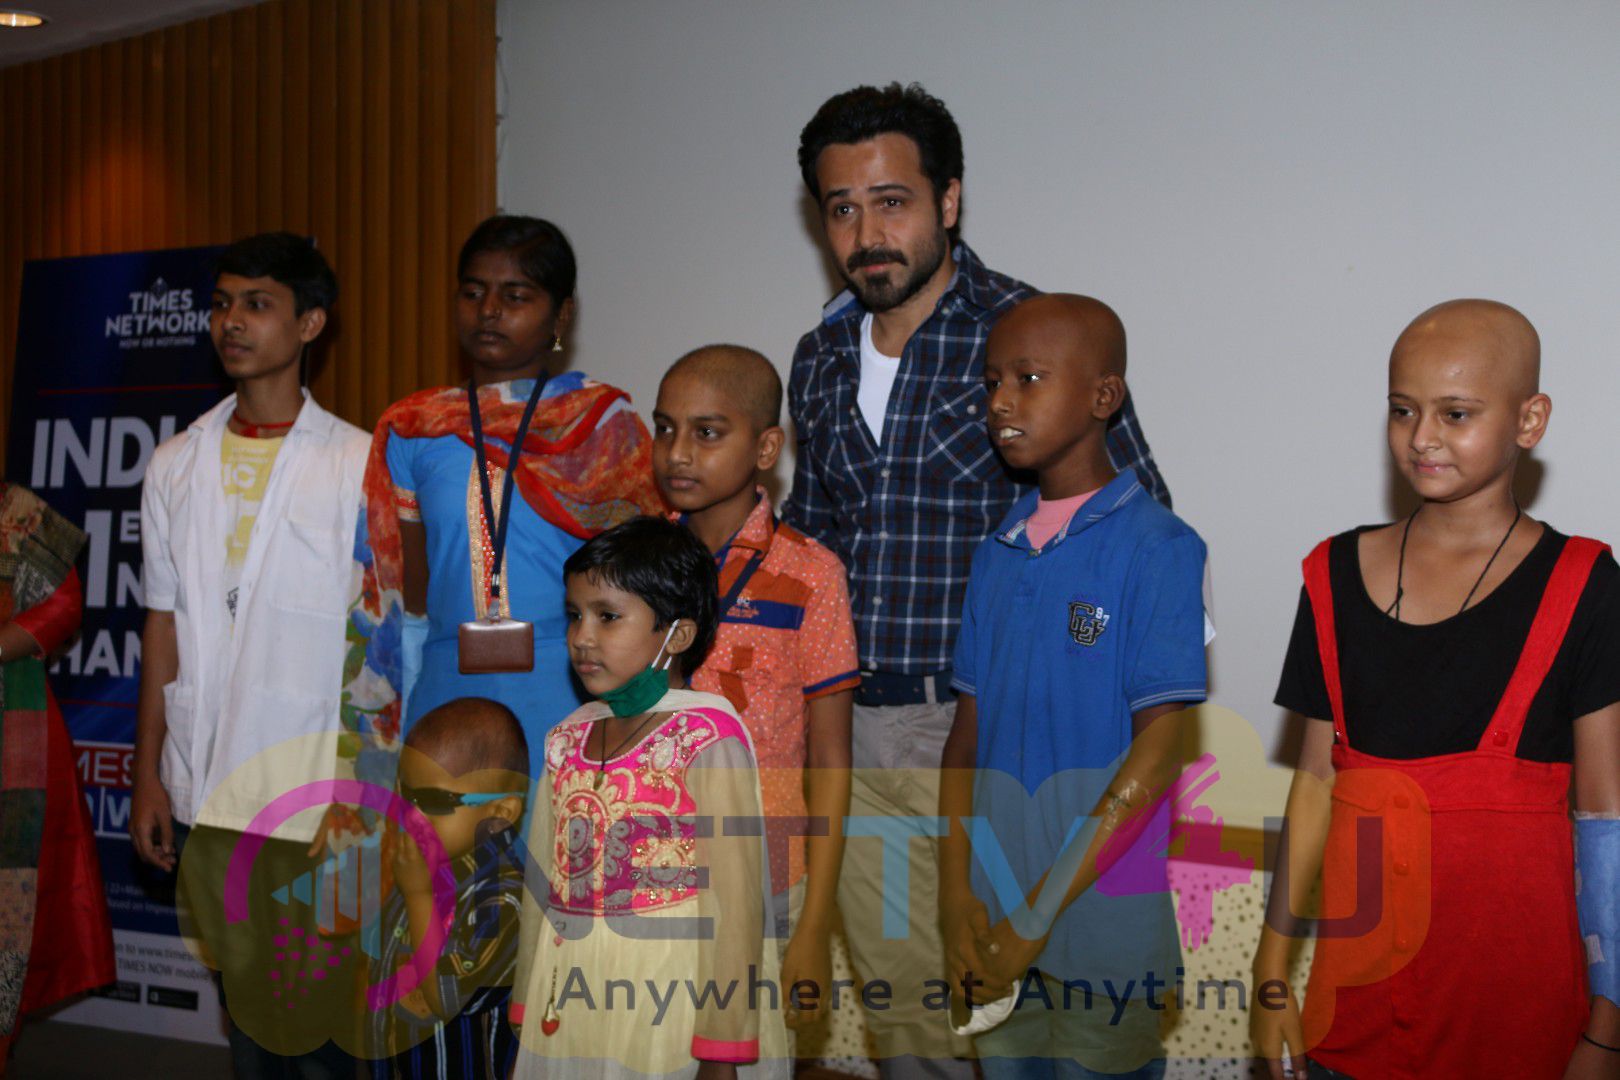  Launch Of Cancer Awareness Campaign In Presence Of Actor Emraan Hashmi Pics Hindi Gallery